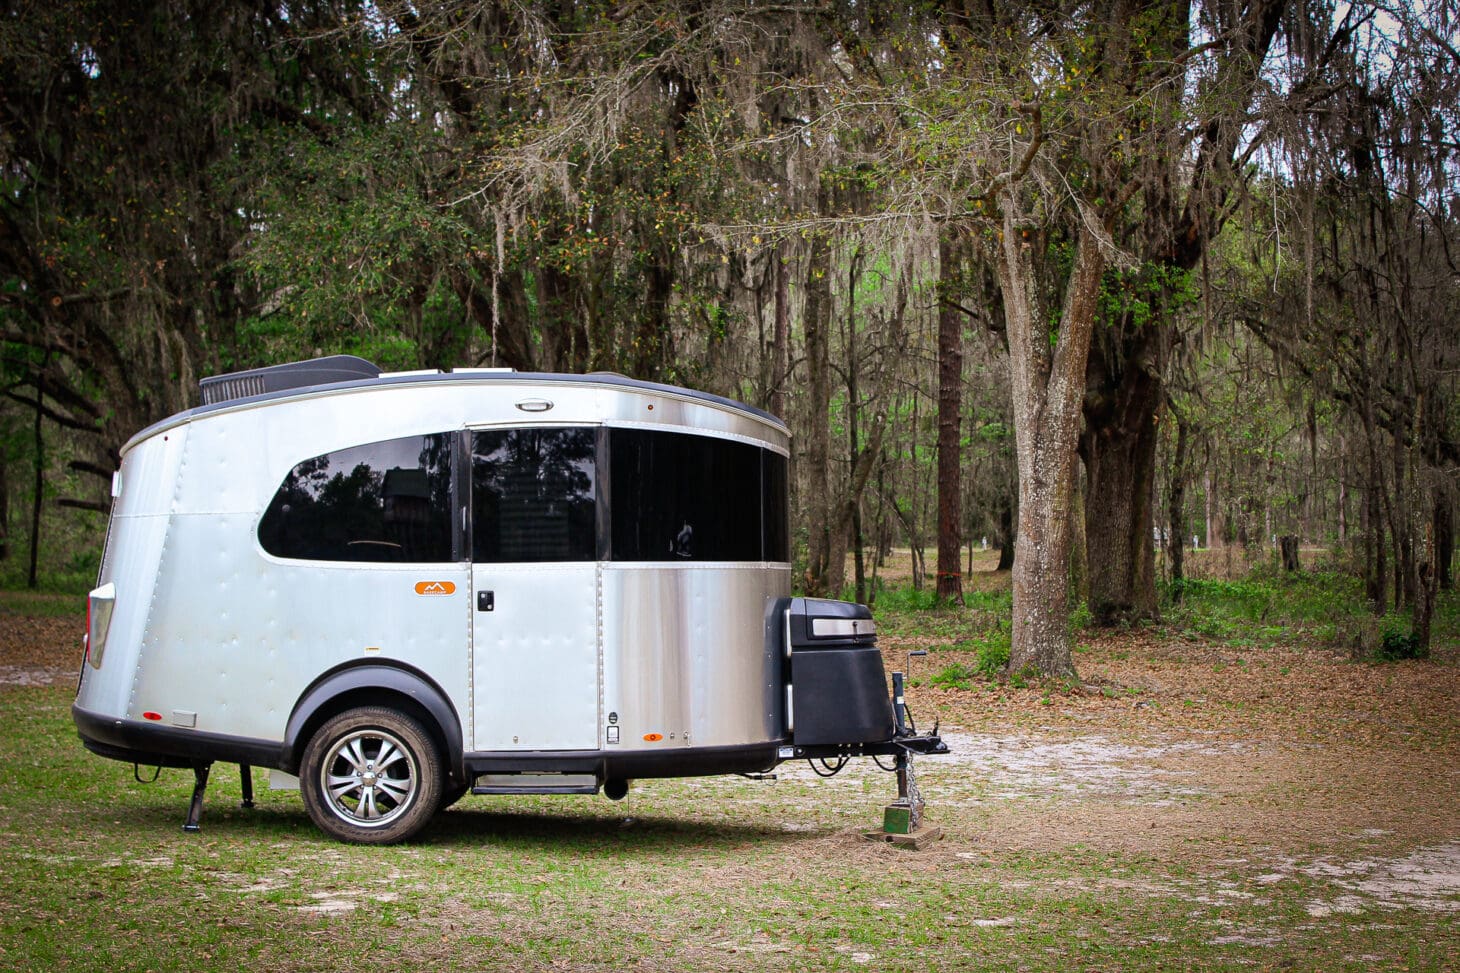 A small, space-age silver Airstream travel trailer RV sits among mossy trees.